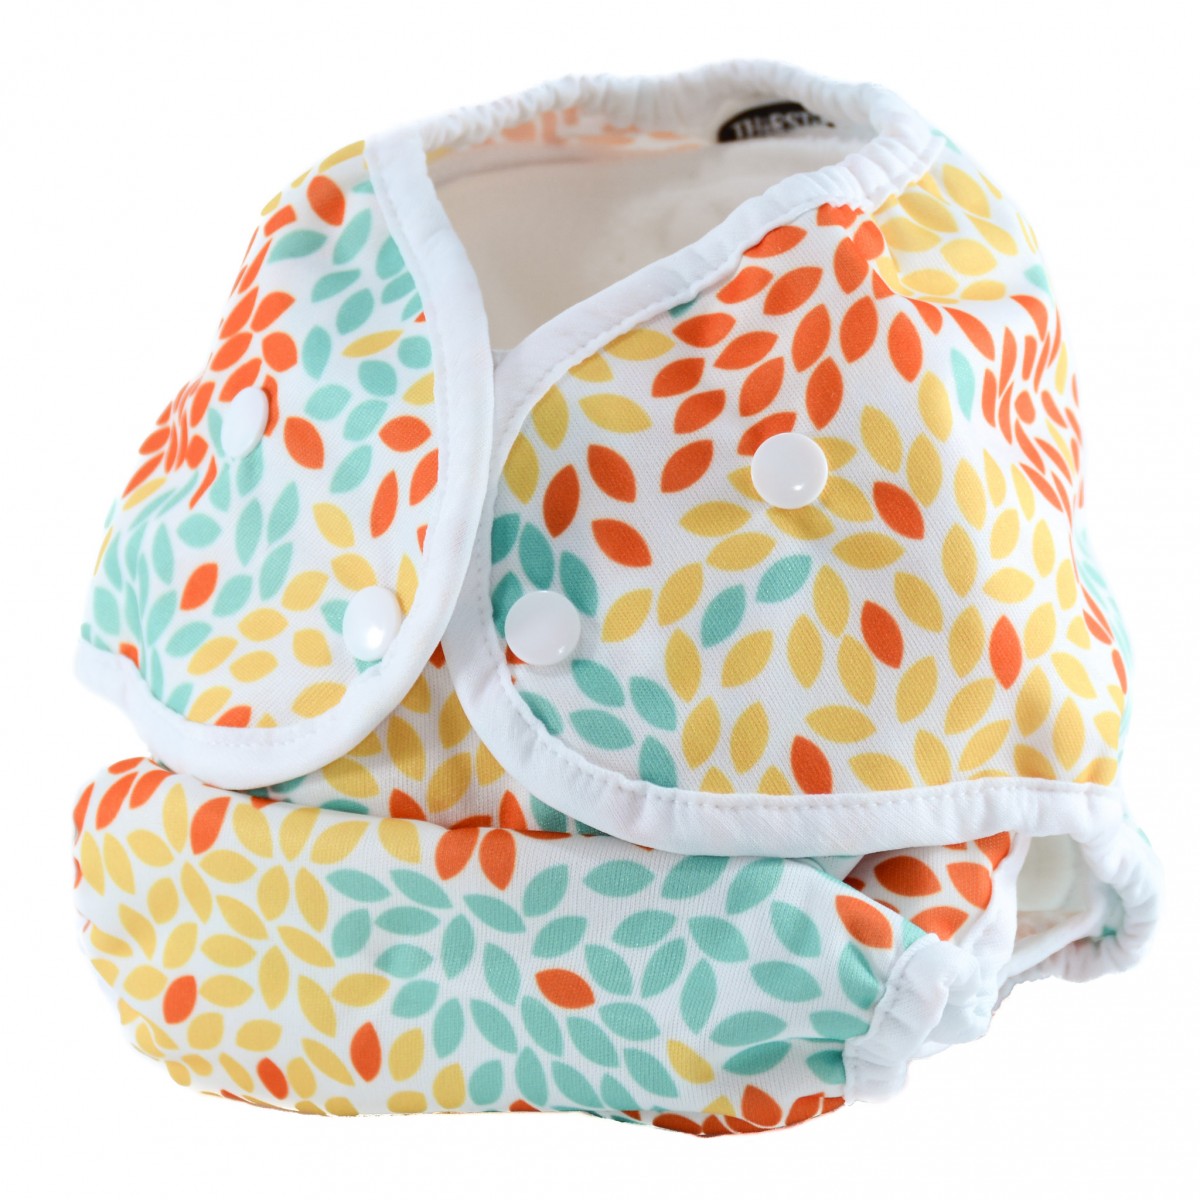 thirsties duo wrap with stay dry duo insert cloth diaper review